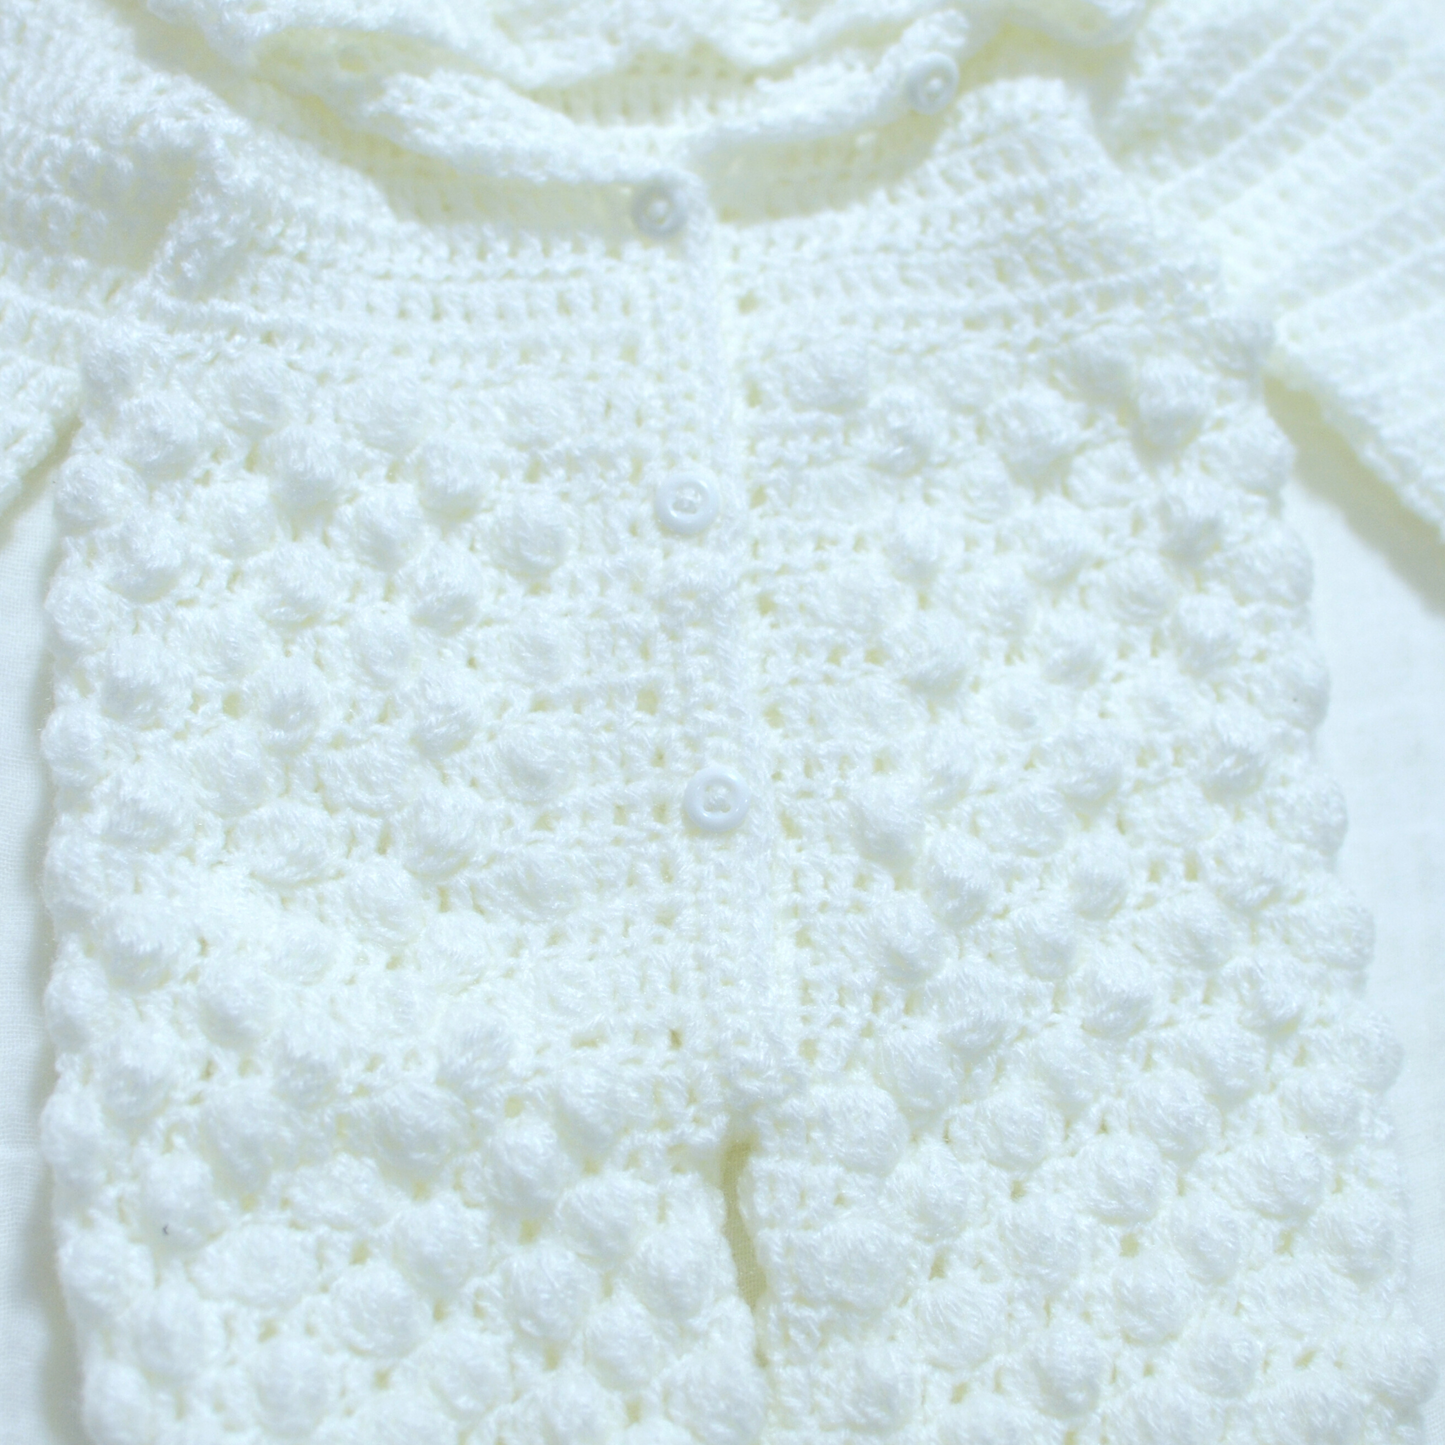 Crochet Hooded Baby Full Body Suit With Socks - 0 to 3 month size